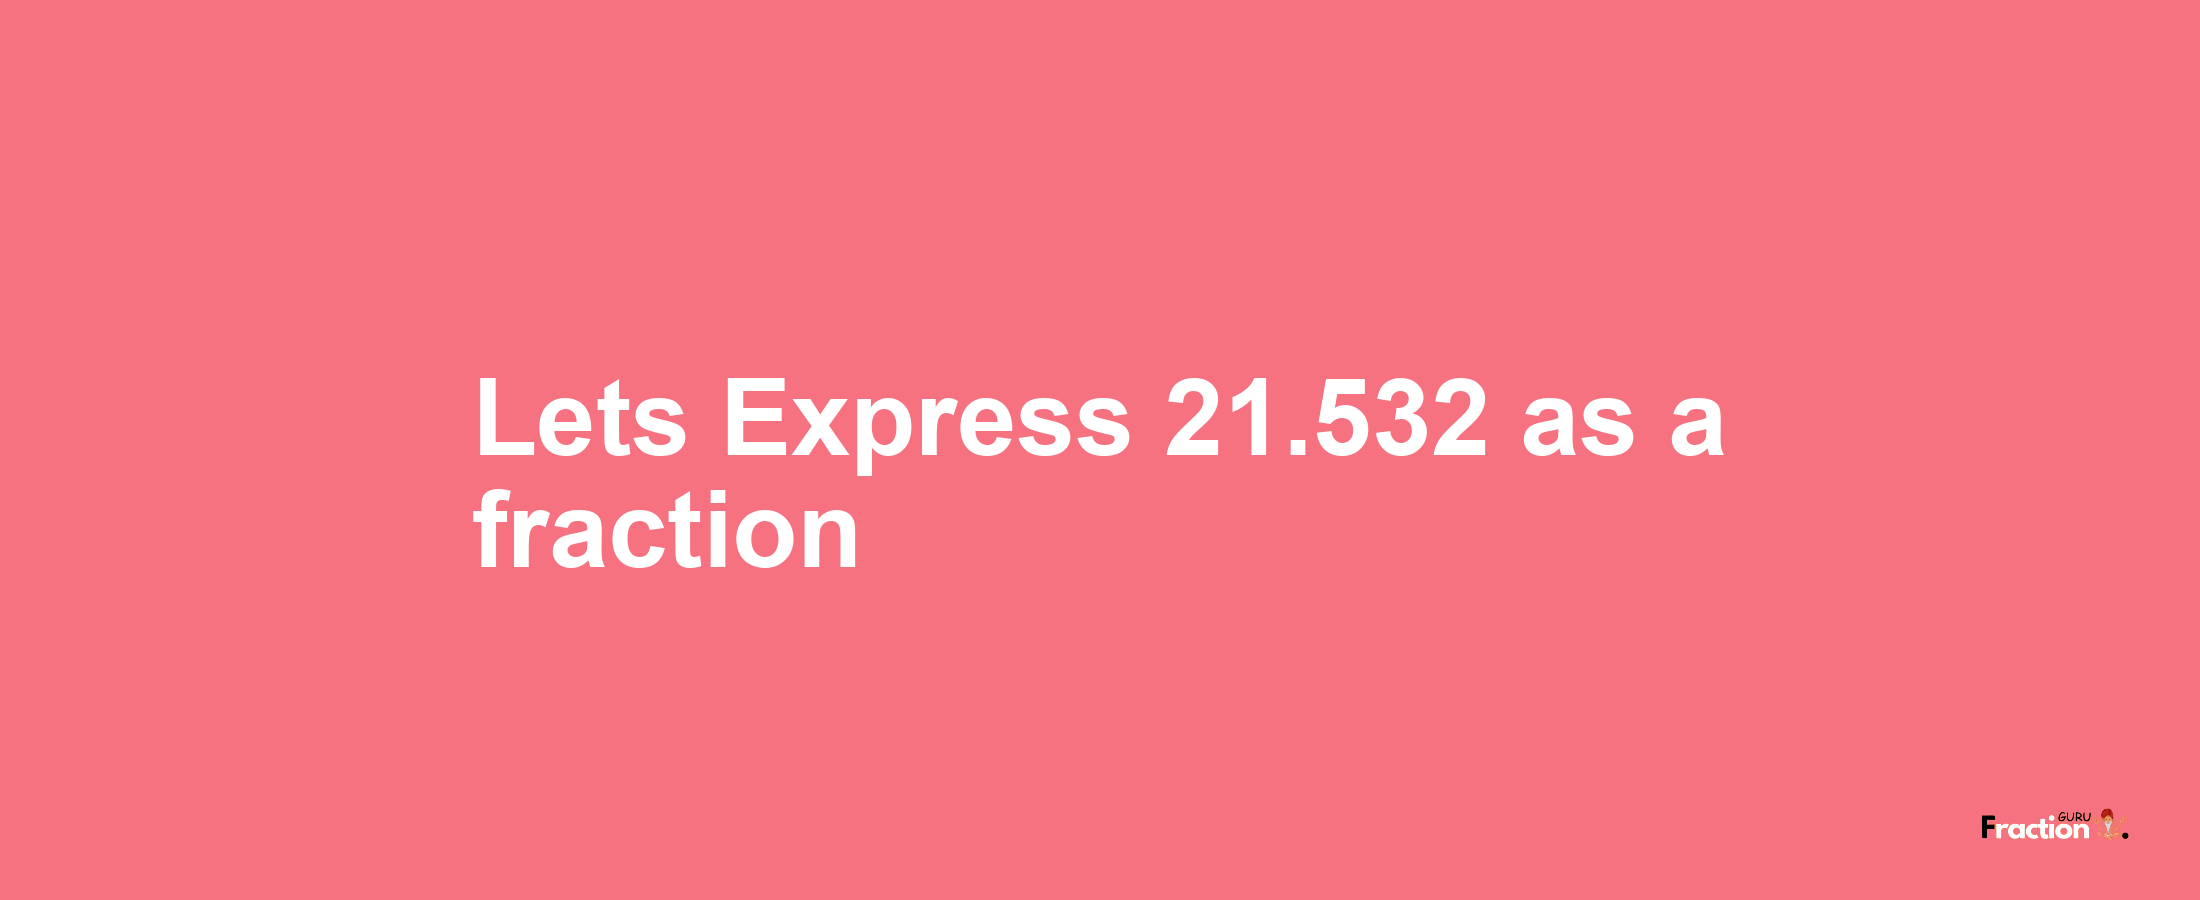 Lets Express 21.532 as afraction